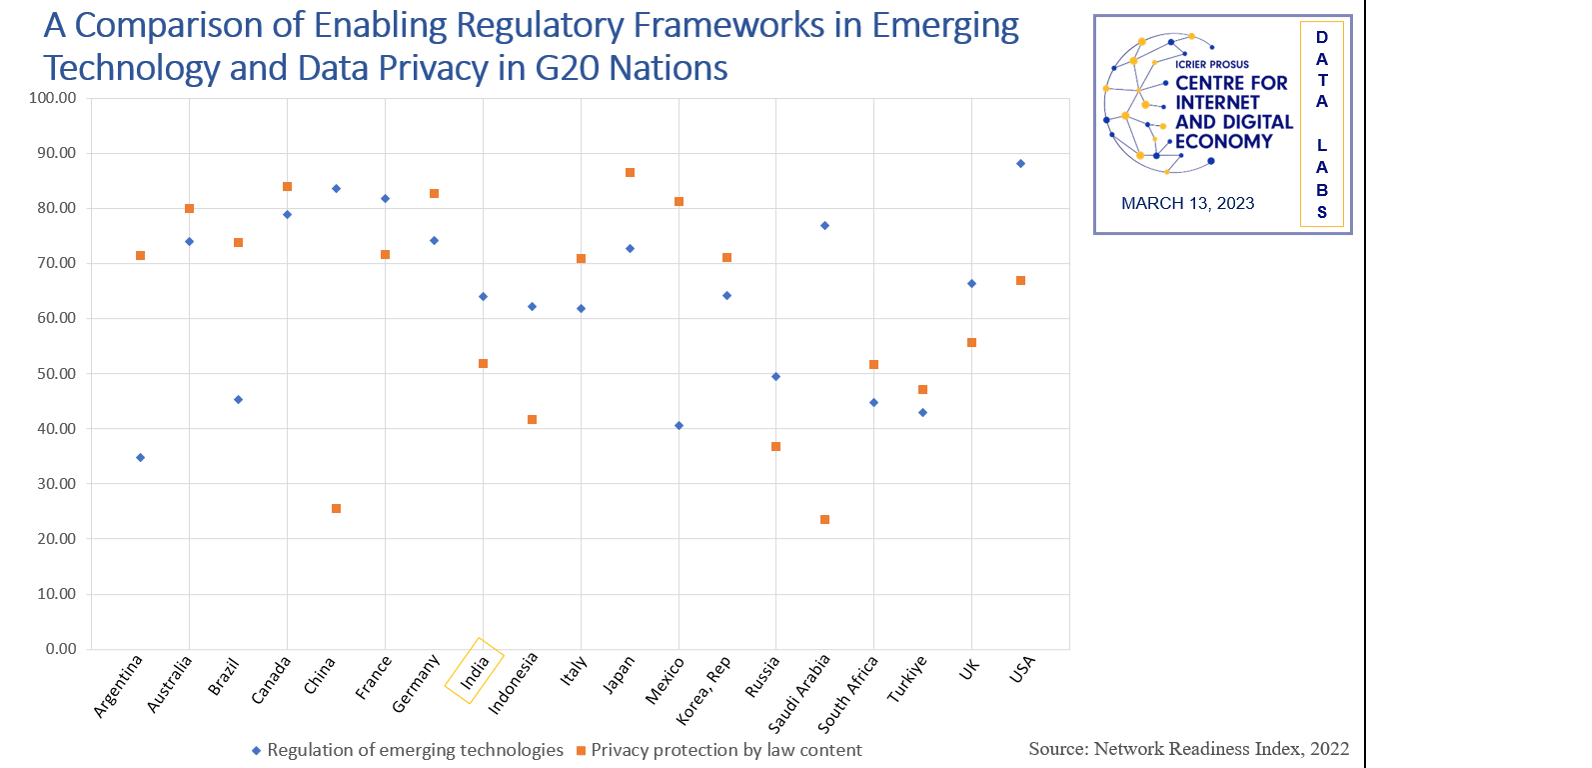 A Comparison of Enabling Regulatory Frameworks in Emerging Technology and Data Privacy in G20 Nations